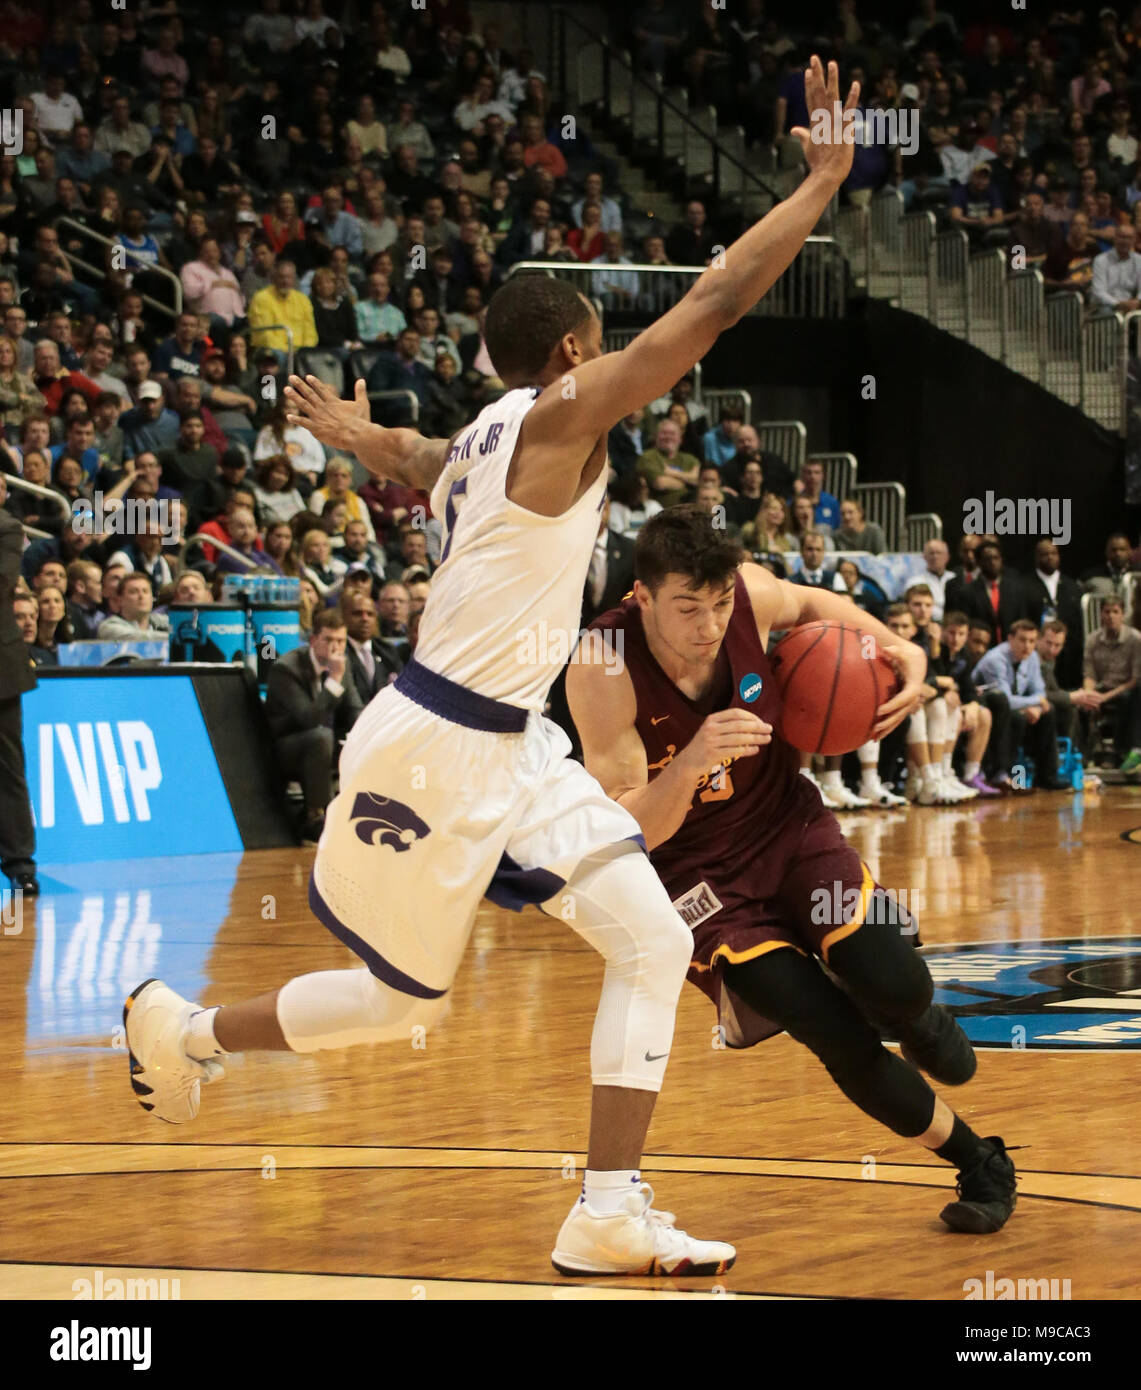 ATLANTA - MAR 24: Loyola-Chicago Ramblers guard Ben Richardson (14) drives past Kansas State Wildcats guard Barry Brown Jr. (5) during the Elite 8 game at Philips Arena on March 24, 2018 in Atlanta, Georgia. Loyola-Chicago won 78-62 to advance to the Final Four. Stock Photo